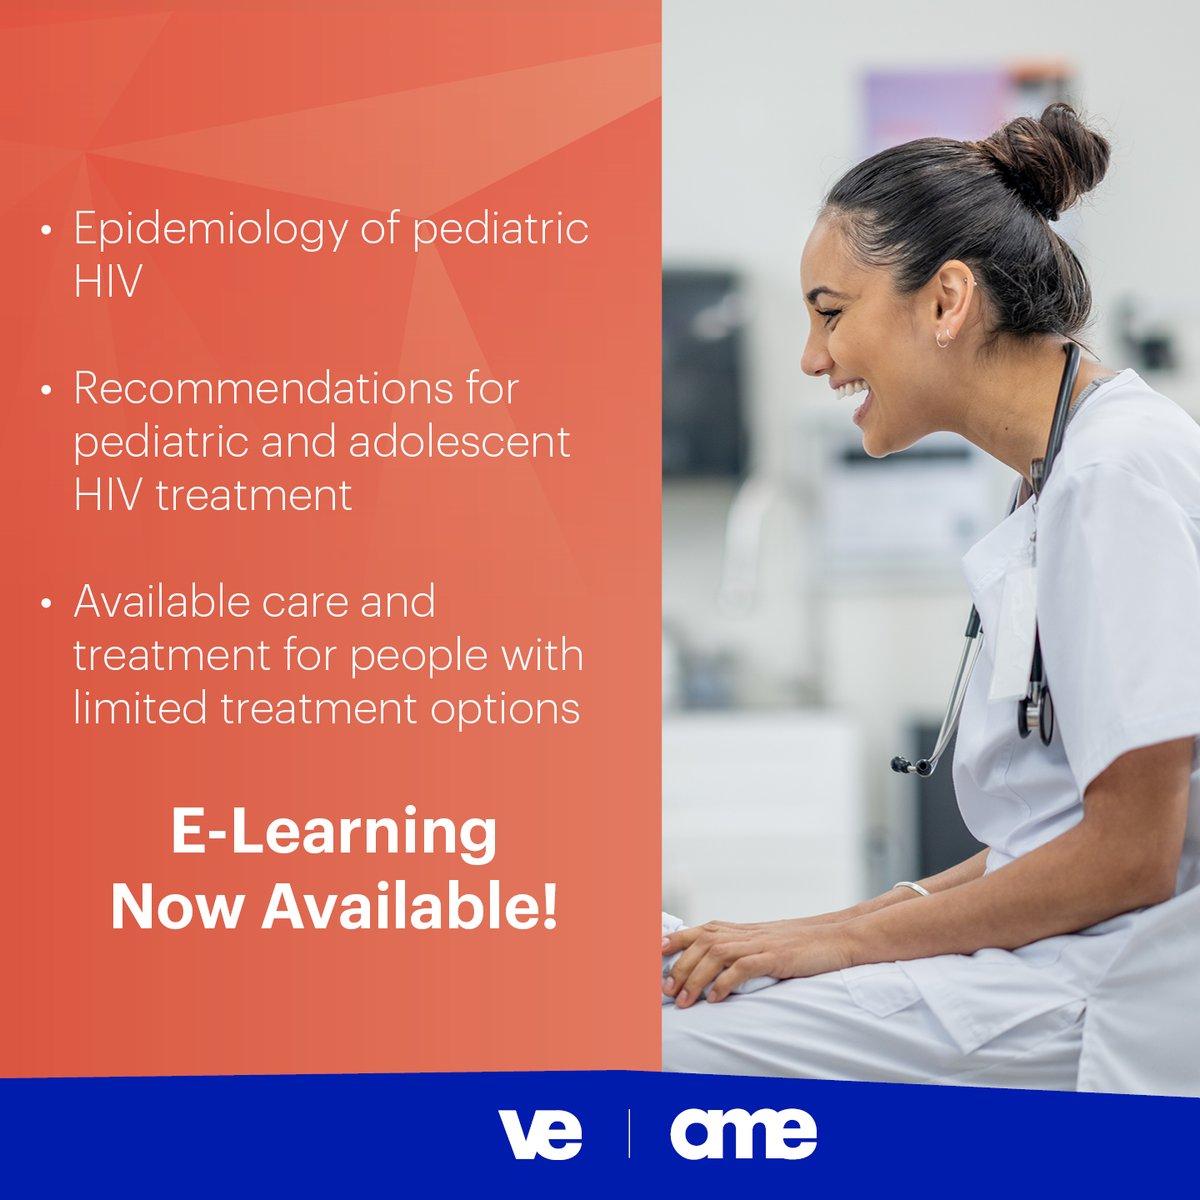 Ready to level up your knowledge in pediatrics & HIV? The #CME accredited E-Learning series will equip you with the latest clinical findings on pediatric care & #HIV. Waived fees for academia apply! See the full list & register: amededu.co/4a5cDB5 #HIVPED #OMHcourses